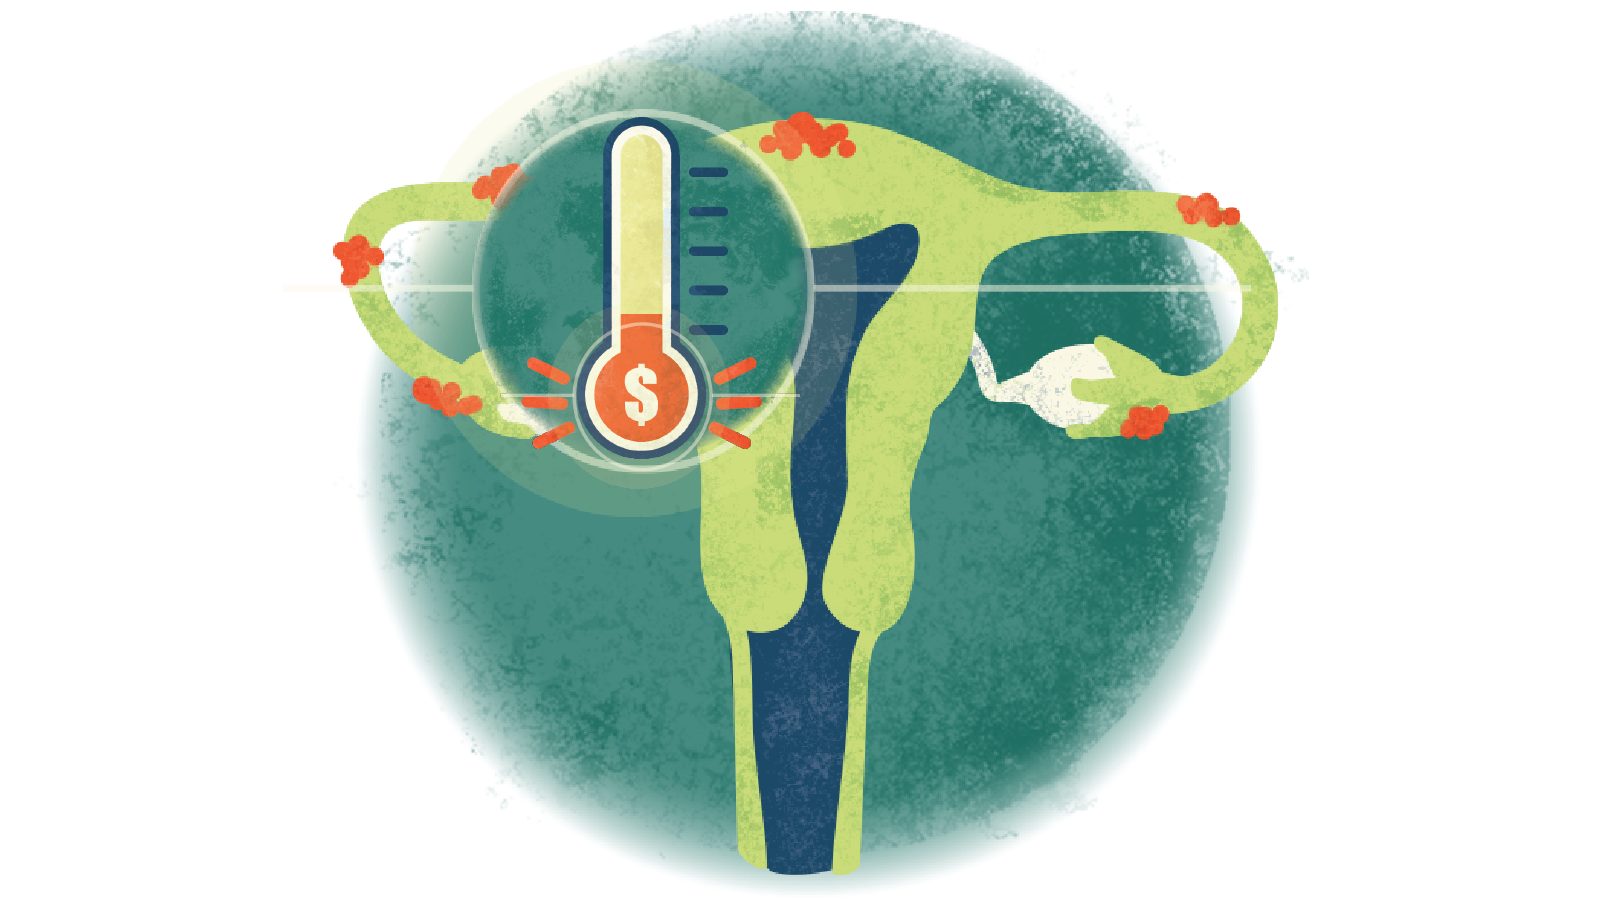 Illustration of a thermometer-looking icon measuring money over a uterus with endometriosis